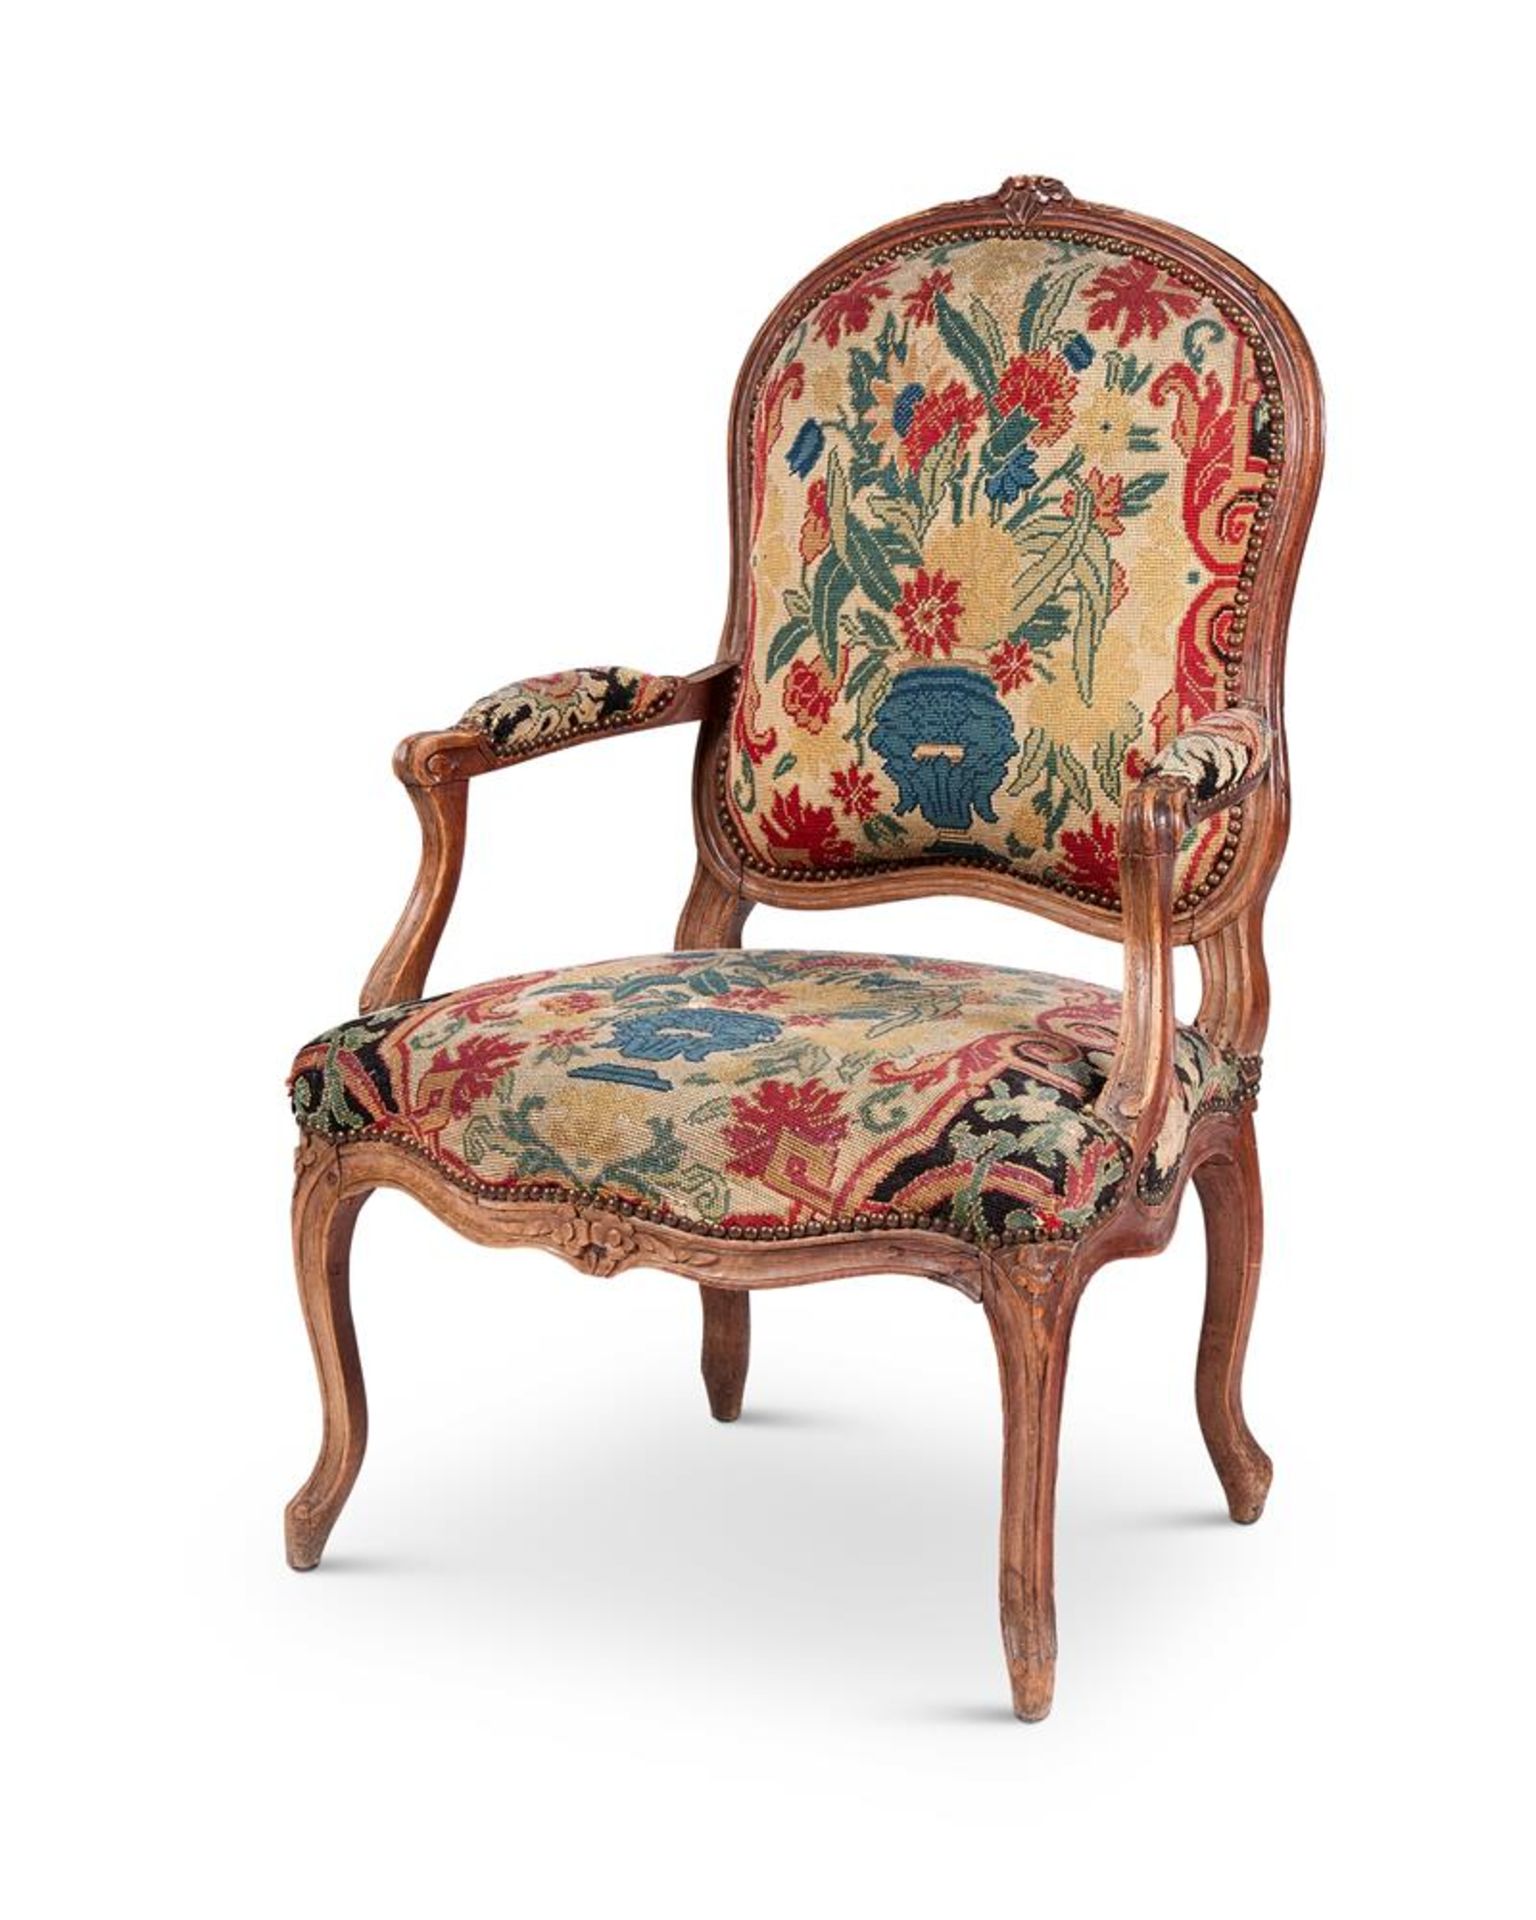 A LOUIS XV STYLE BEECH FRAMED FAUTEUIL, 19TH CENTURY